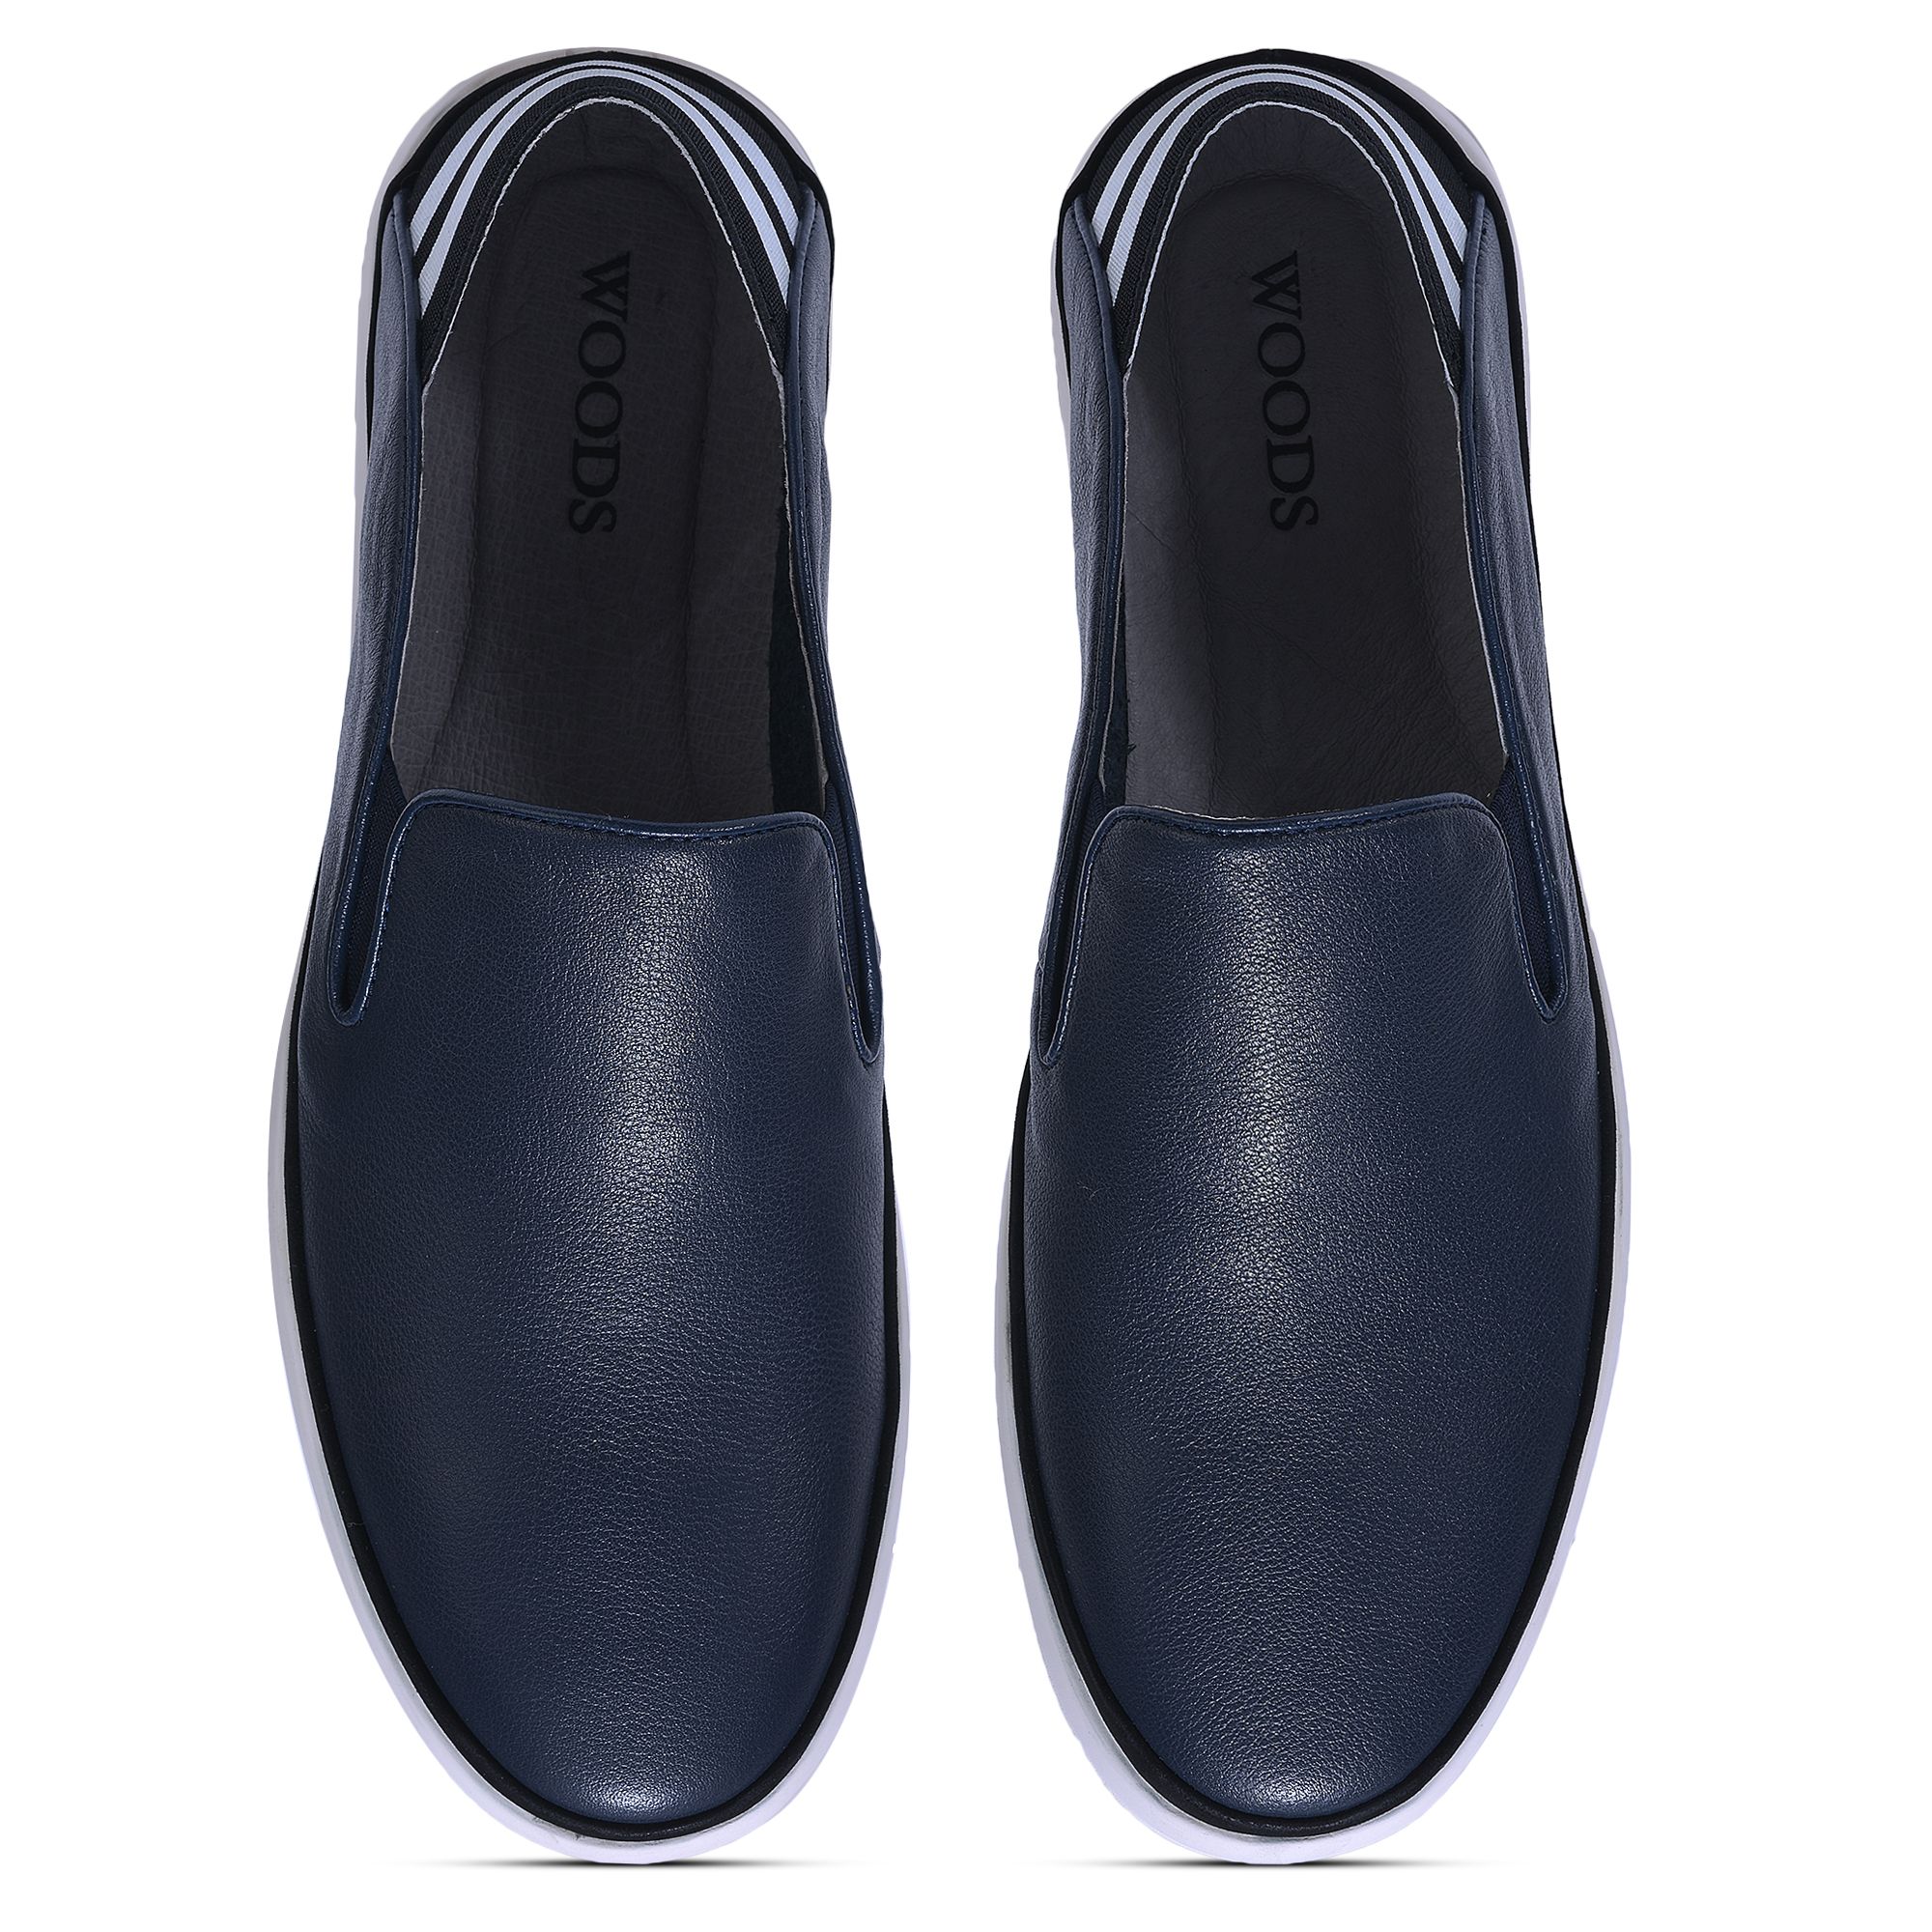 NAVY casual slip-on shoes